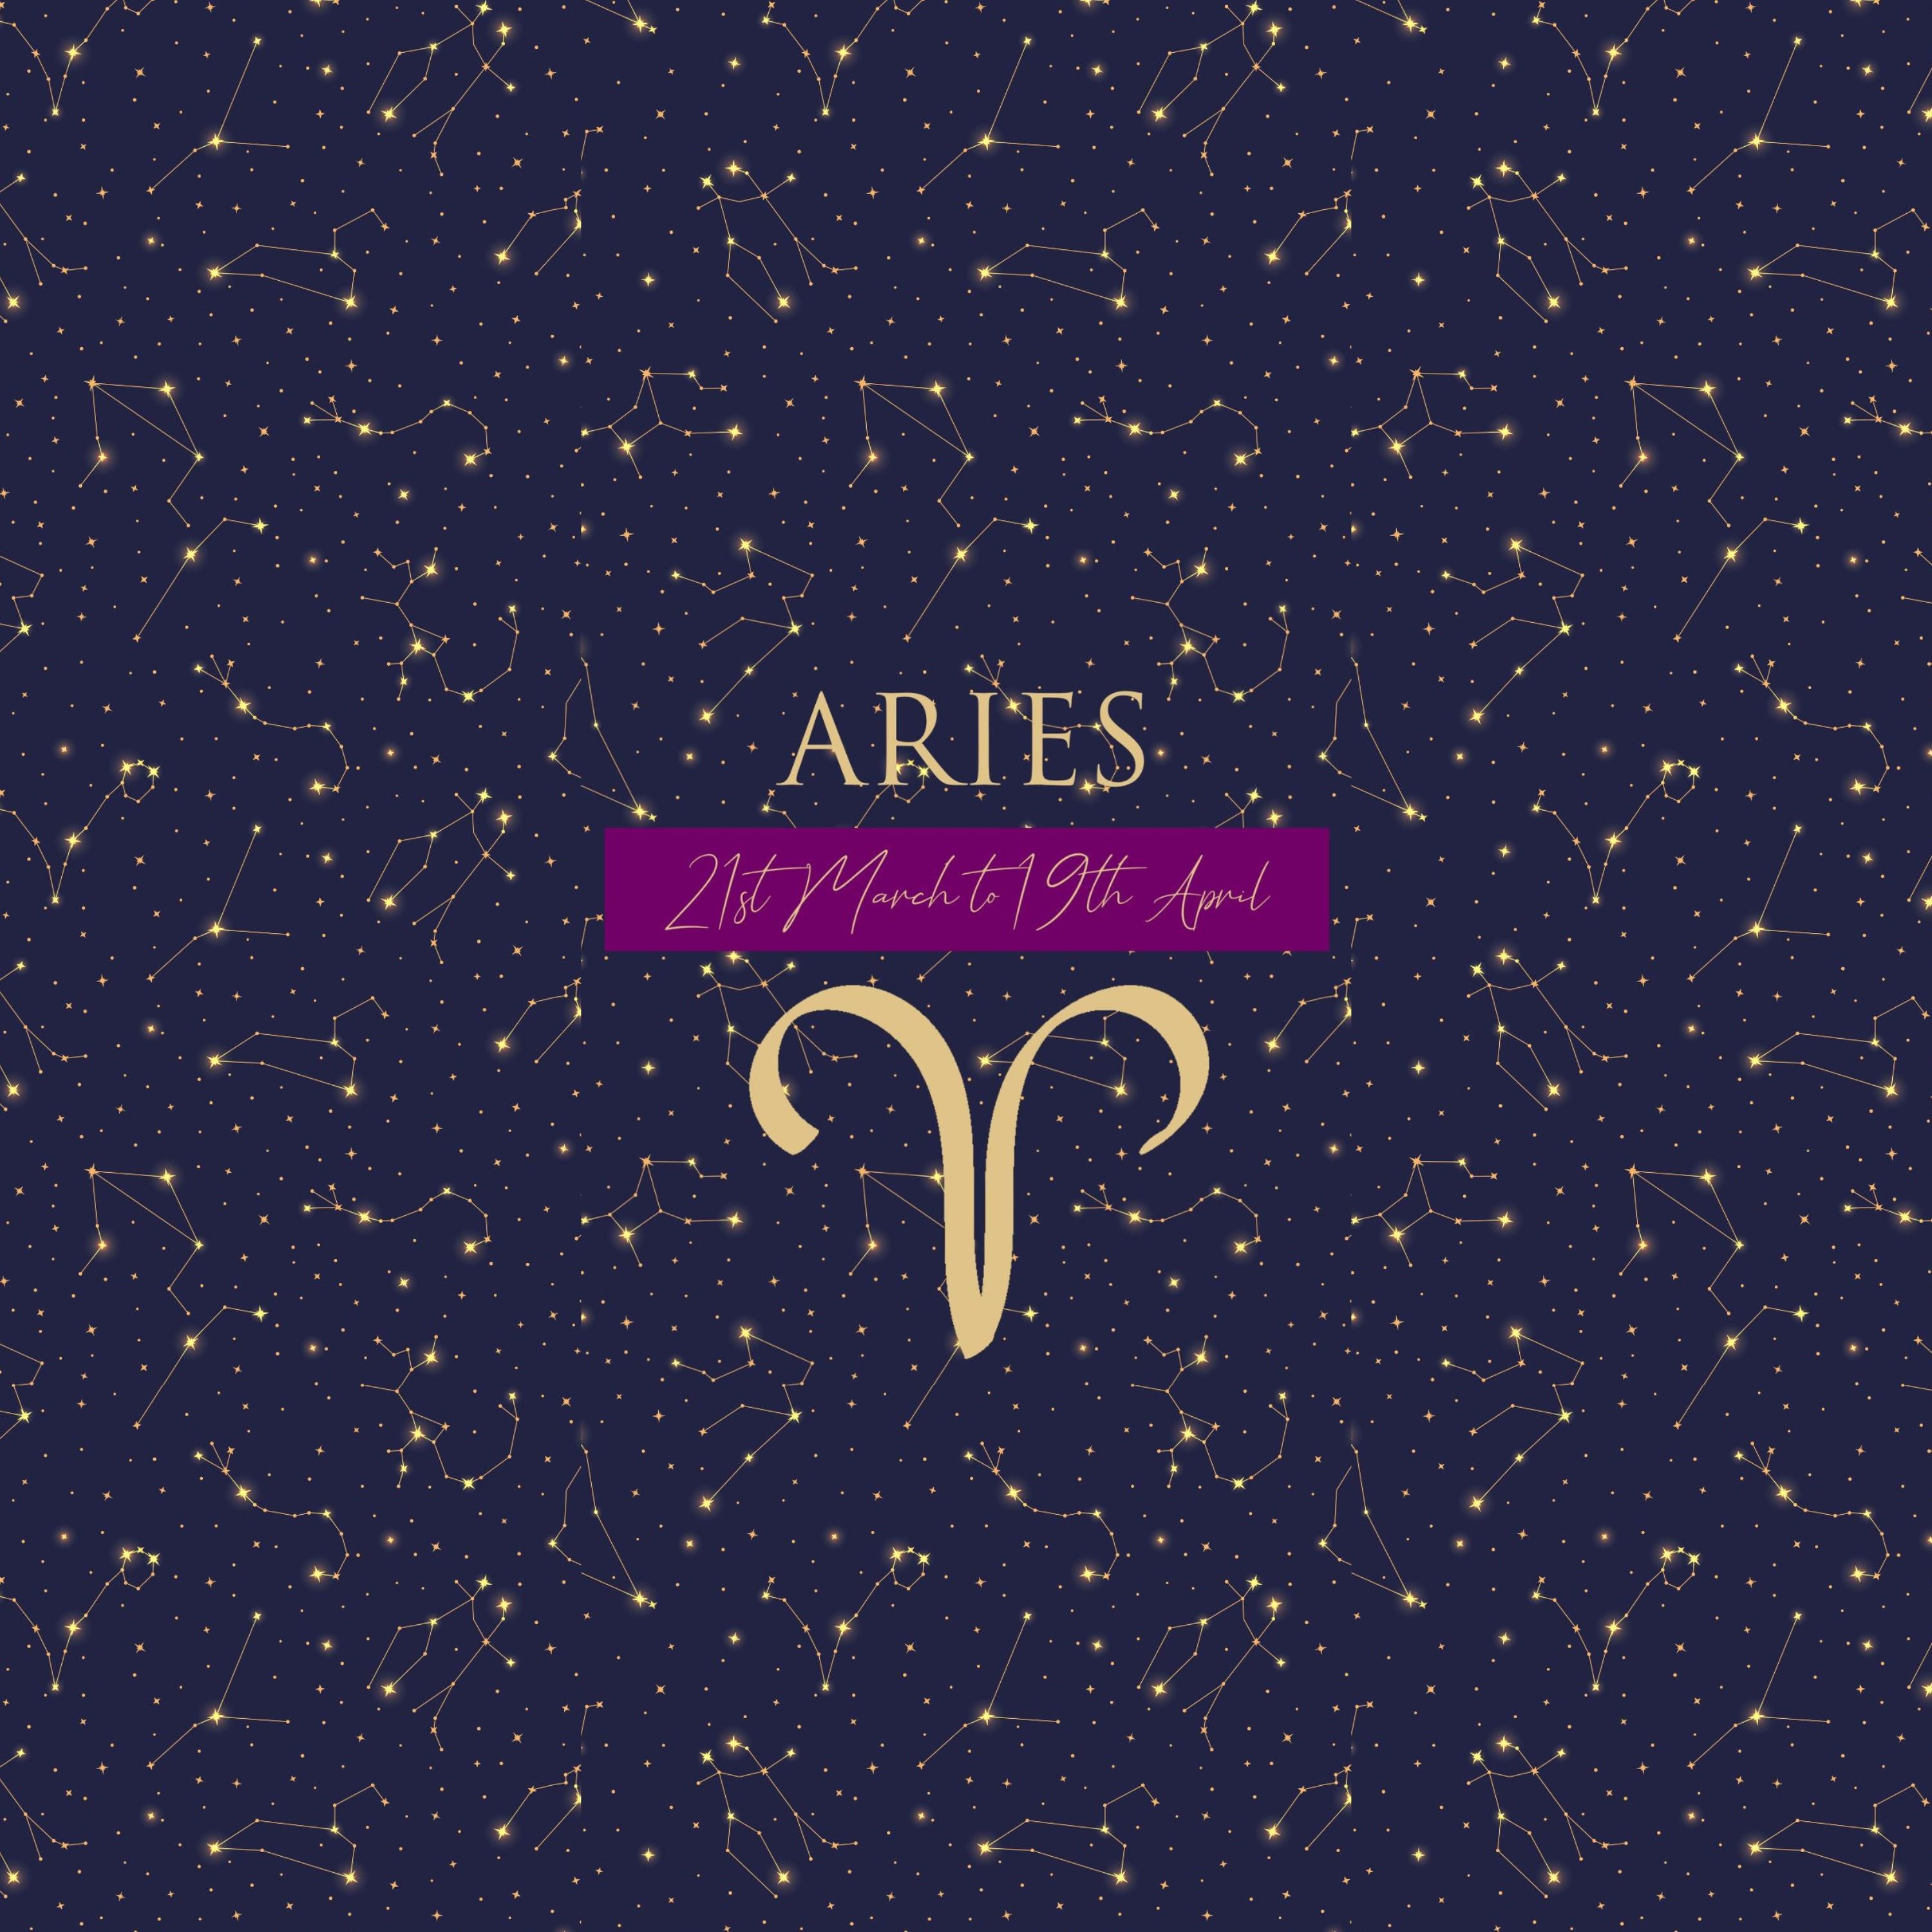 aries zodiac sign from march 21 to april 19